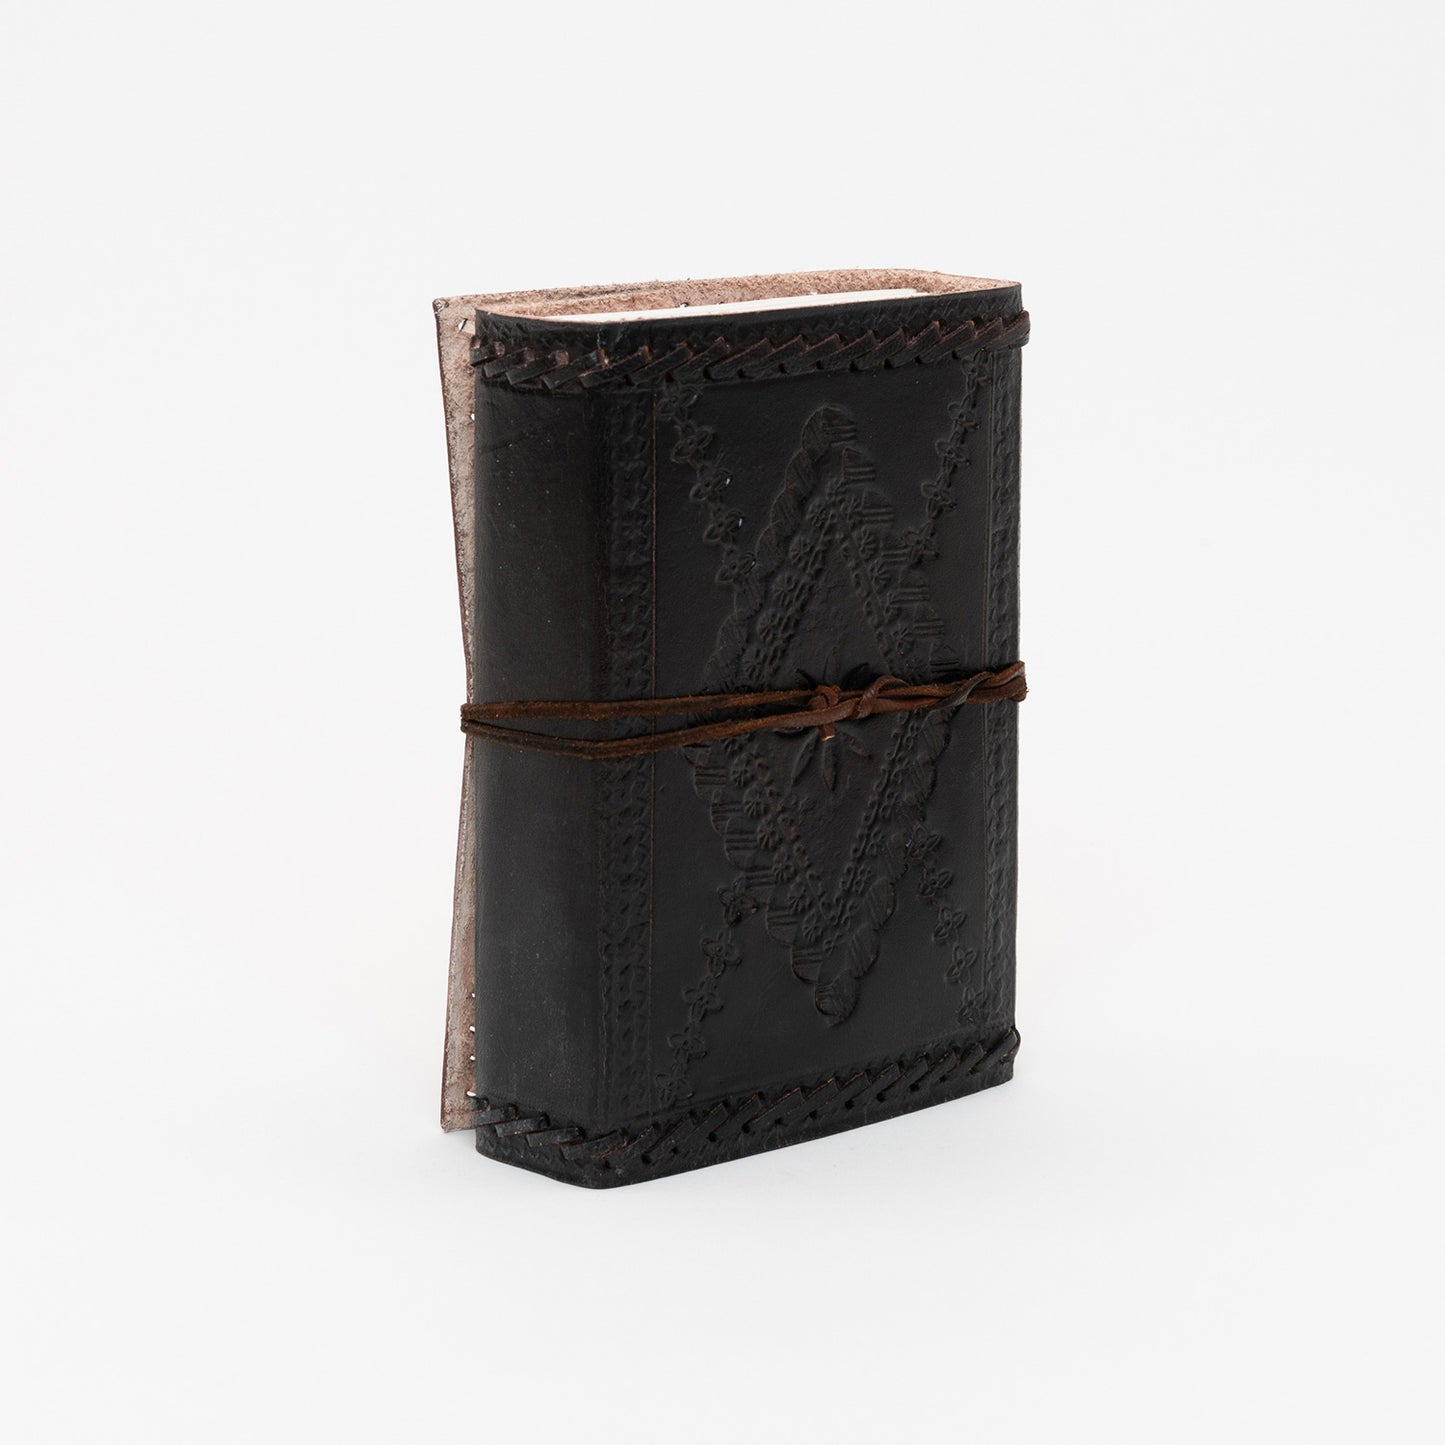 A view of the back of the dark brown leather bound journal.